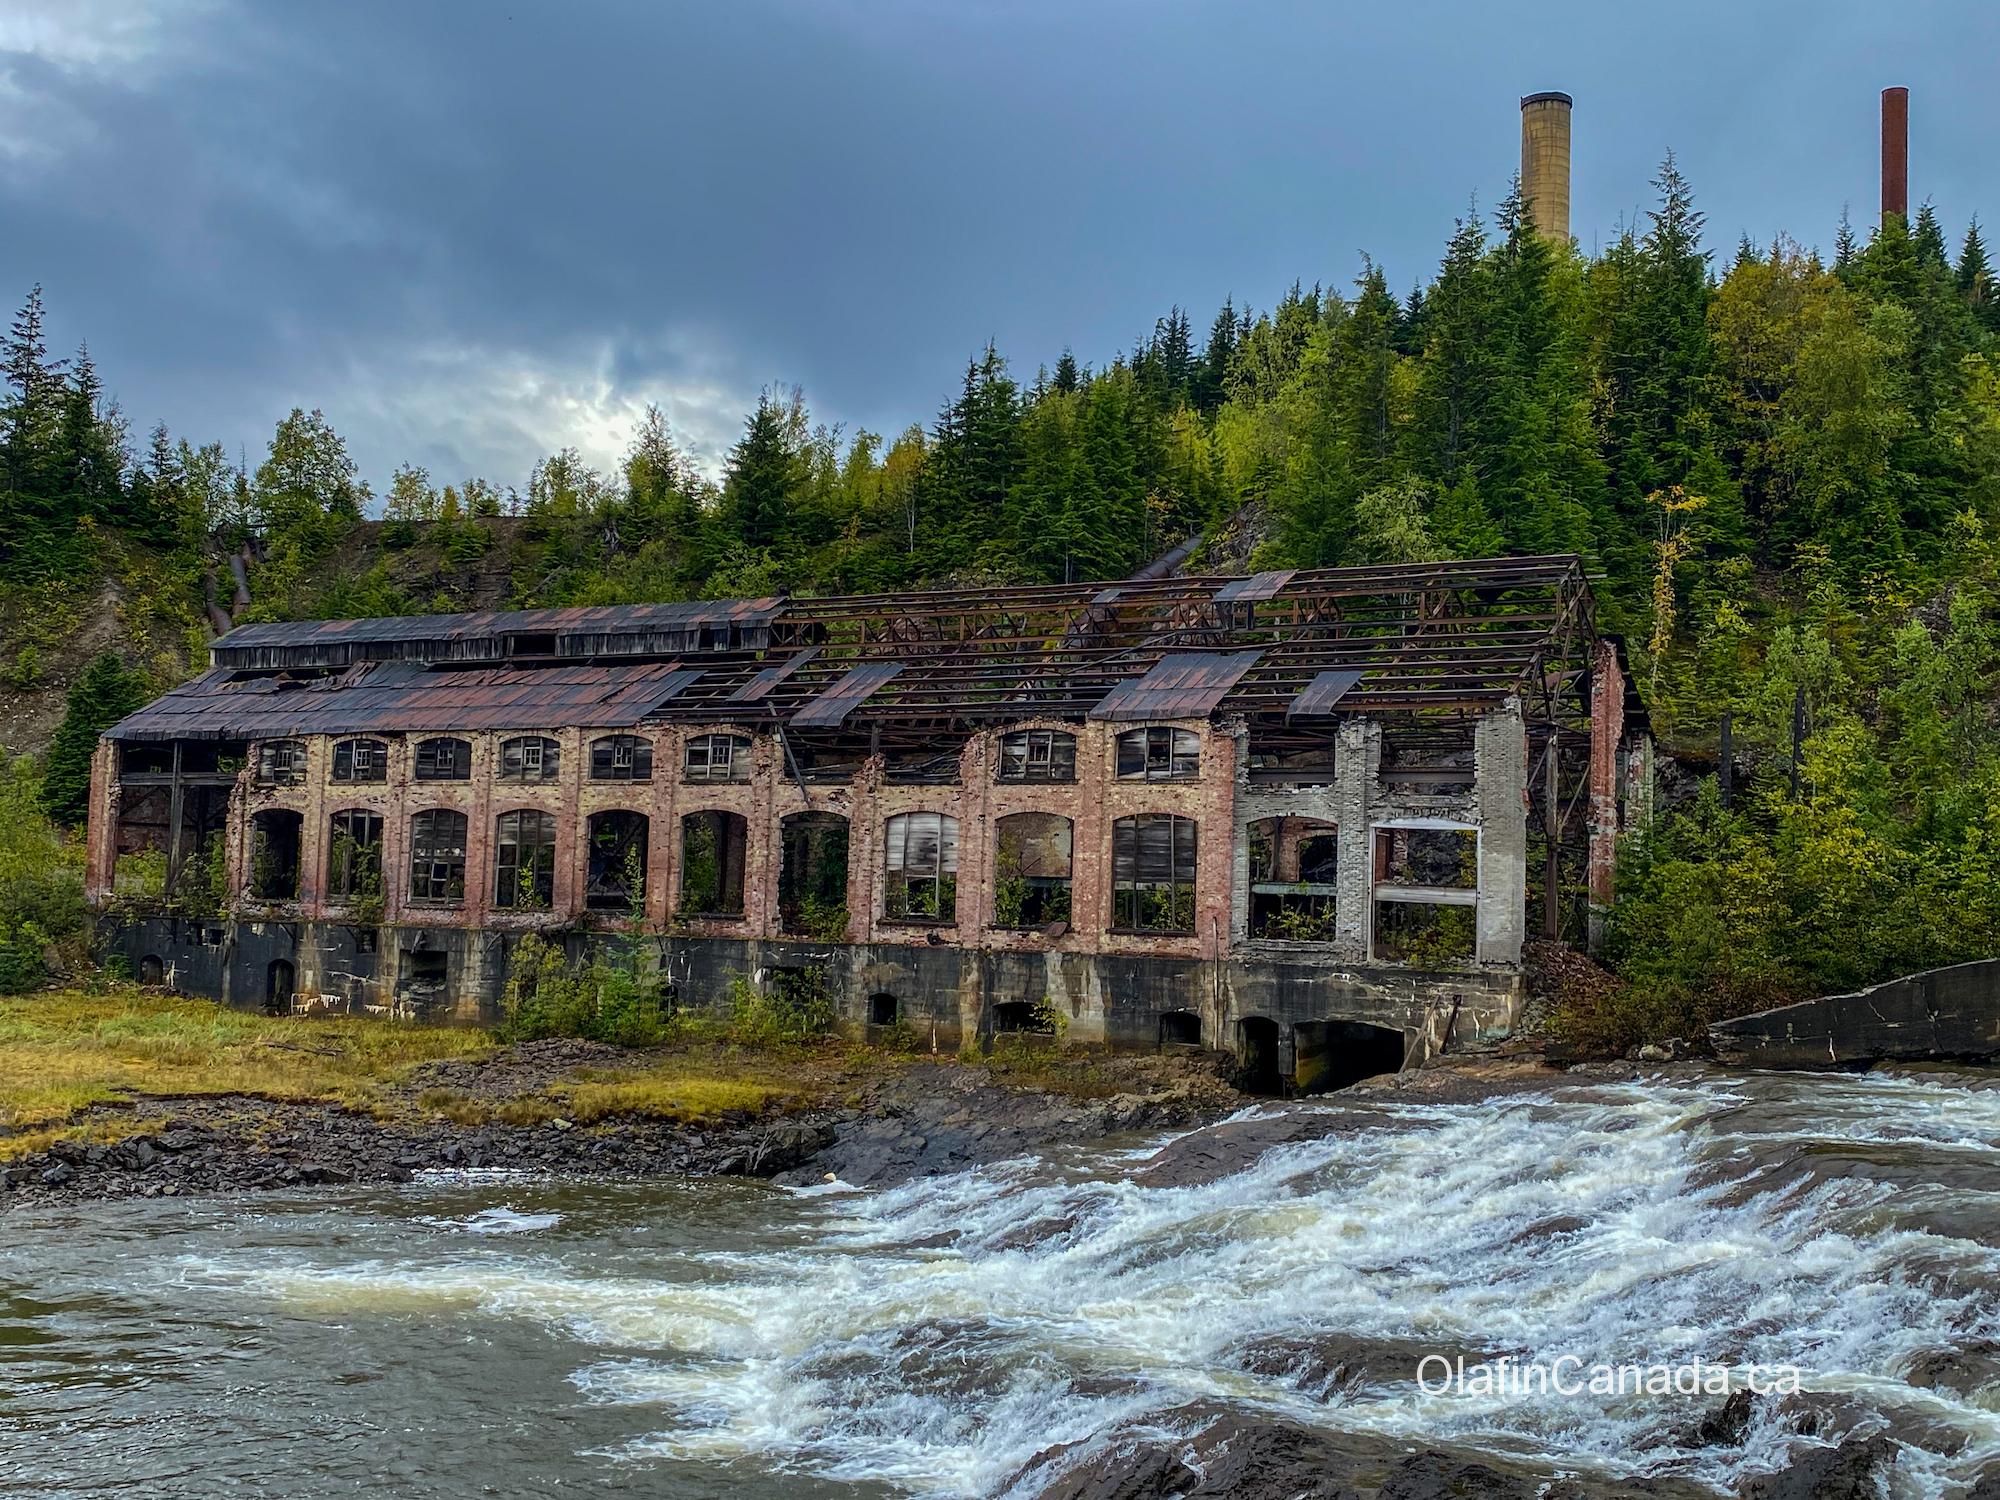 Powerhouse provided electricity for the smelter, machine shops and other mining operations, as well as the town #olafincanada #britishcolumbia #discoverbc #abandonedbc #anyox #powerhouse